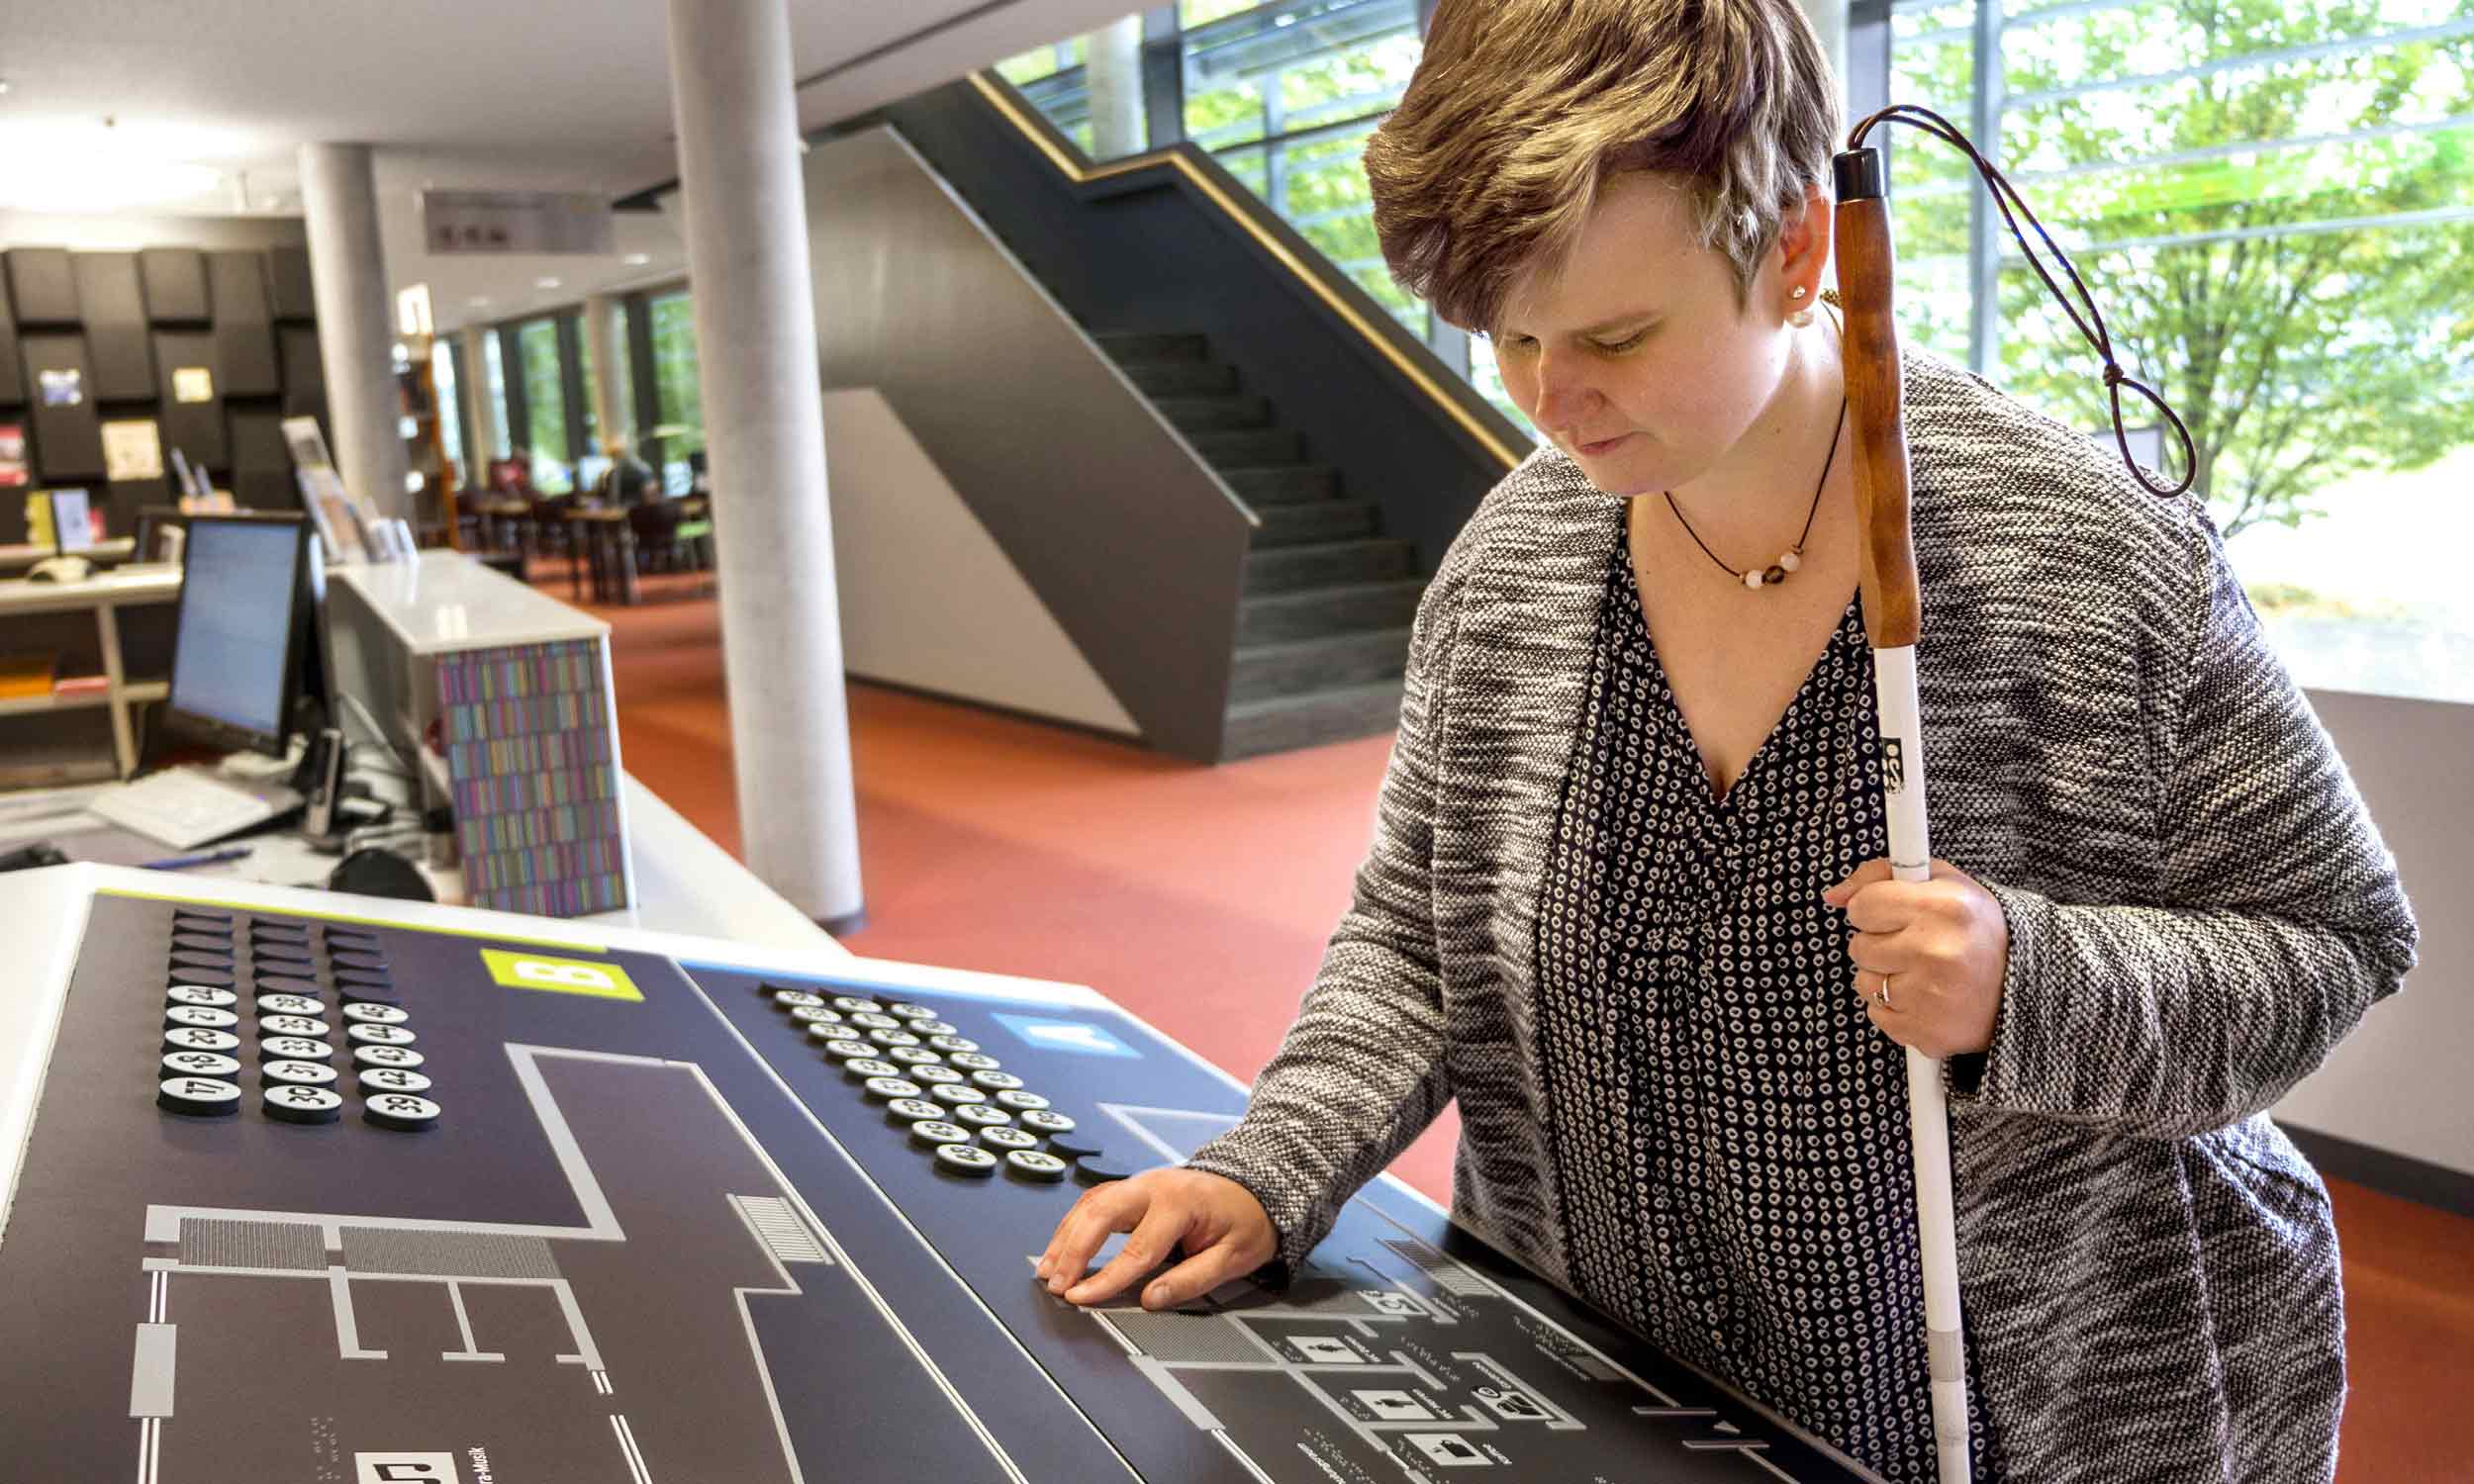 A blind young woman feels the tactile overview plans at the service counter of the State Library.